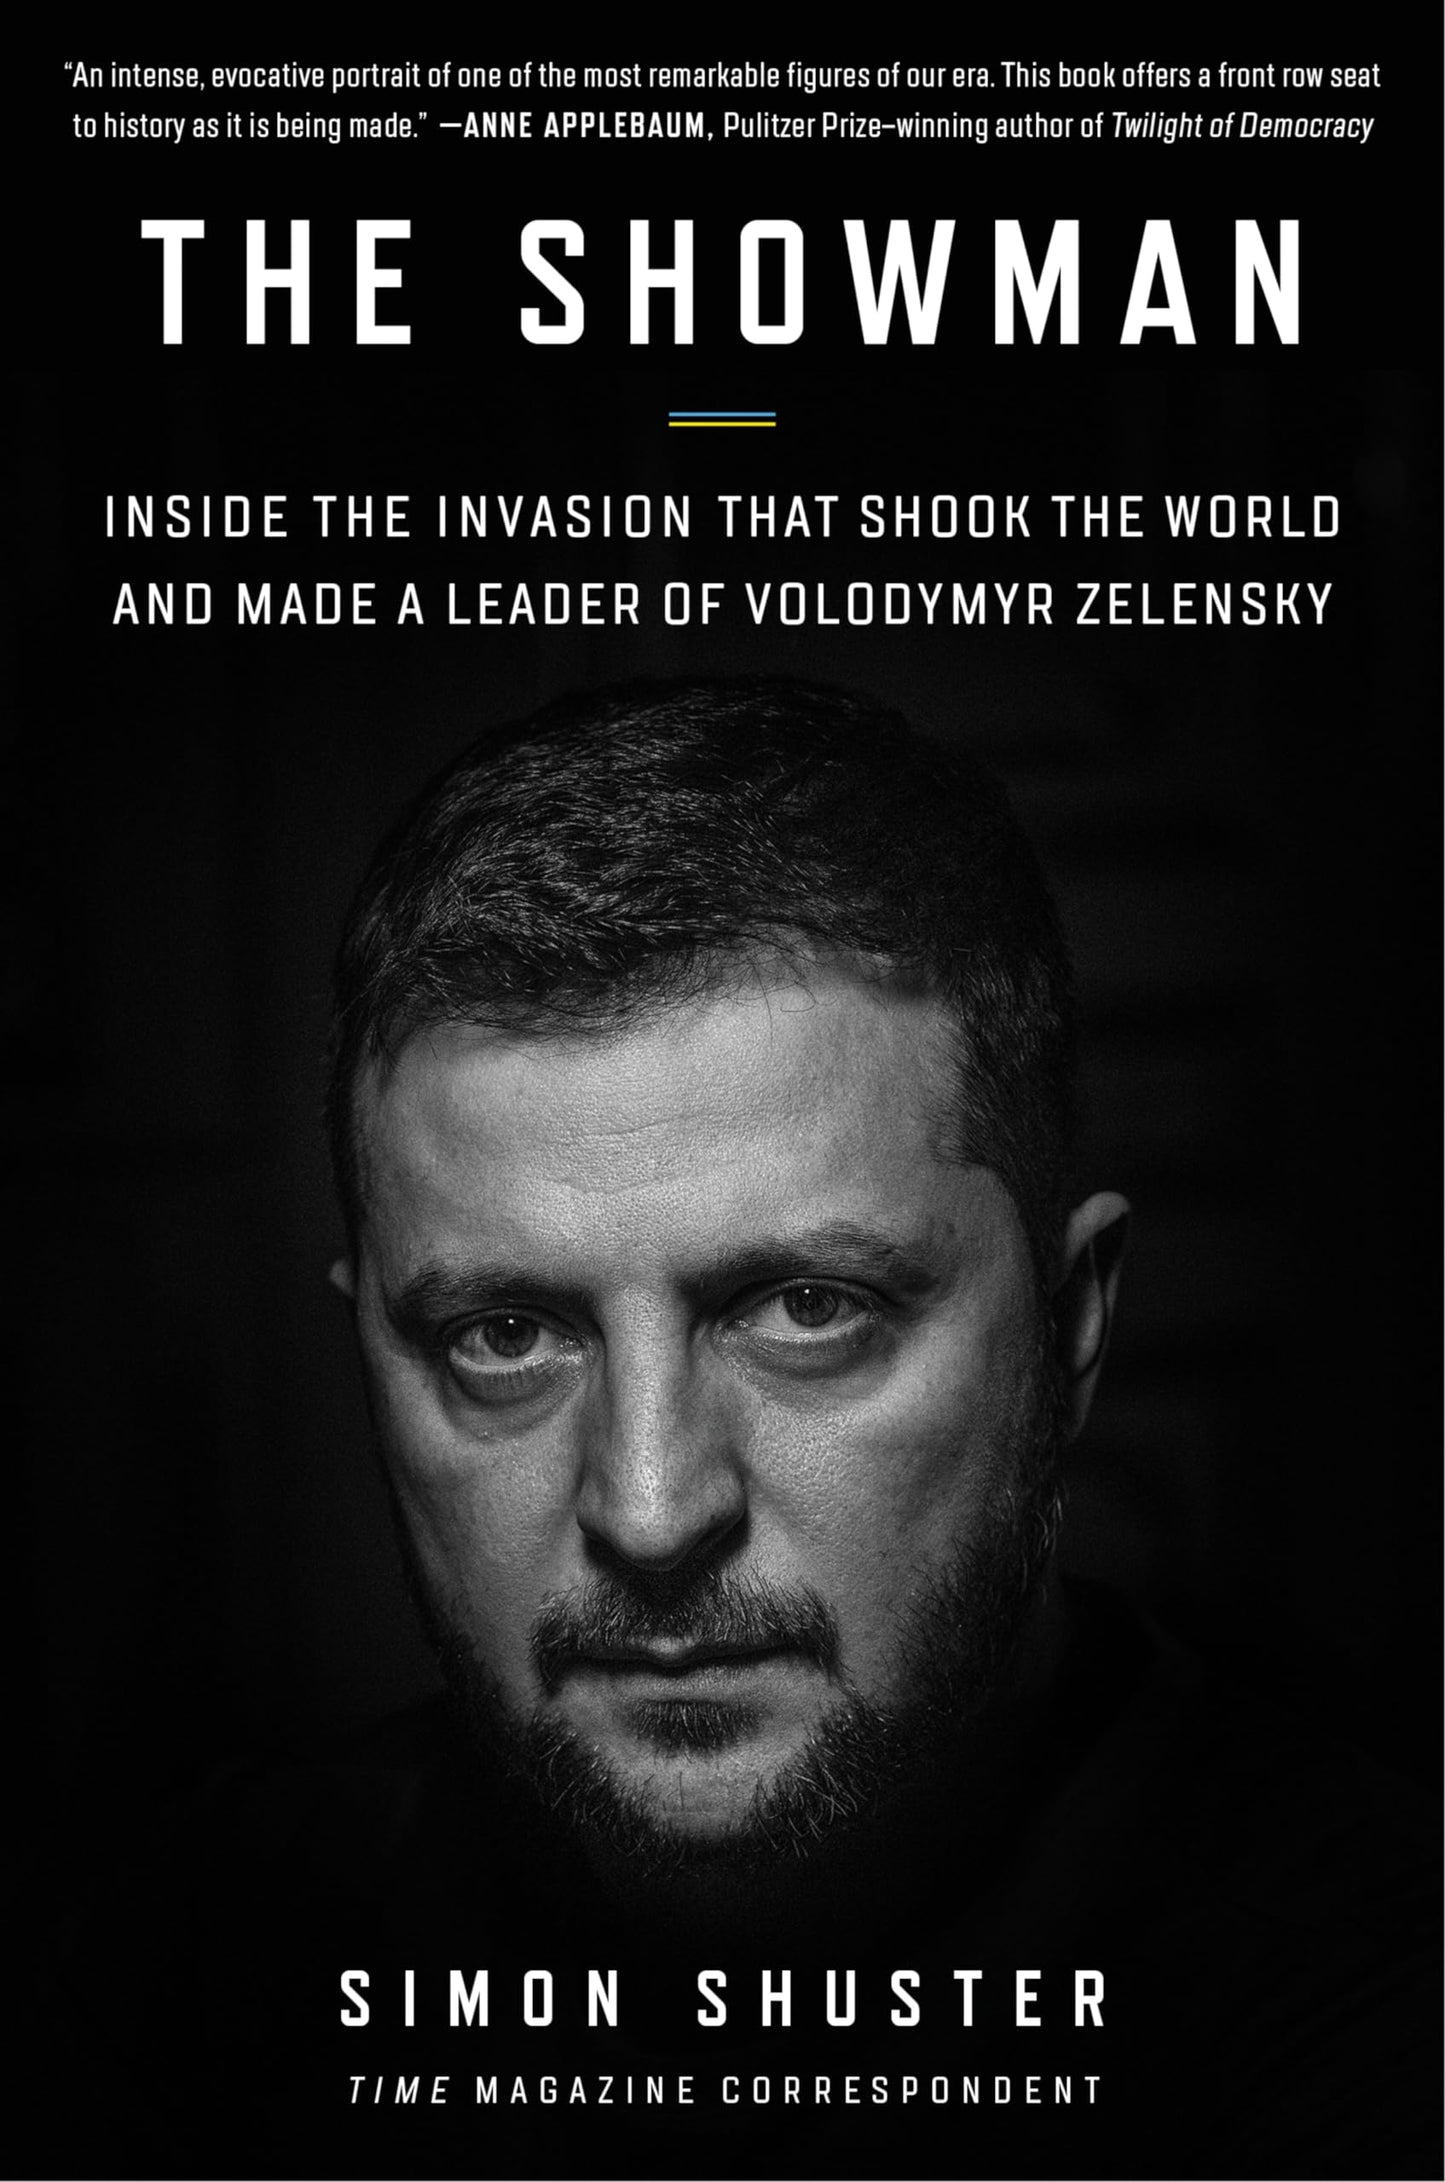 Showman: Inside the Invasion That Shook the World and Made a Leader of Volodymyr Zelensky